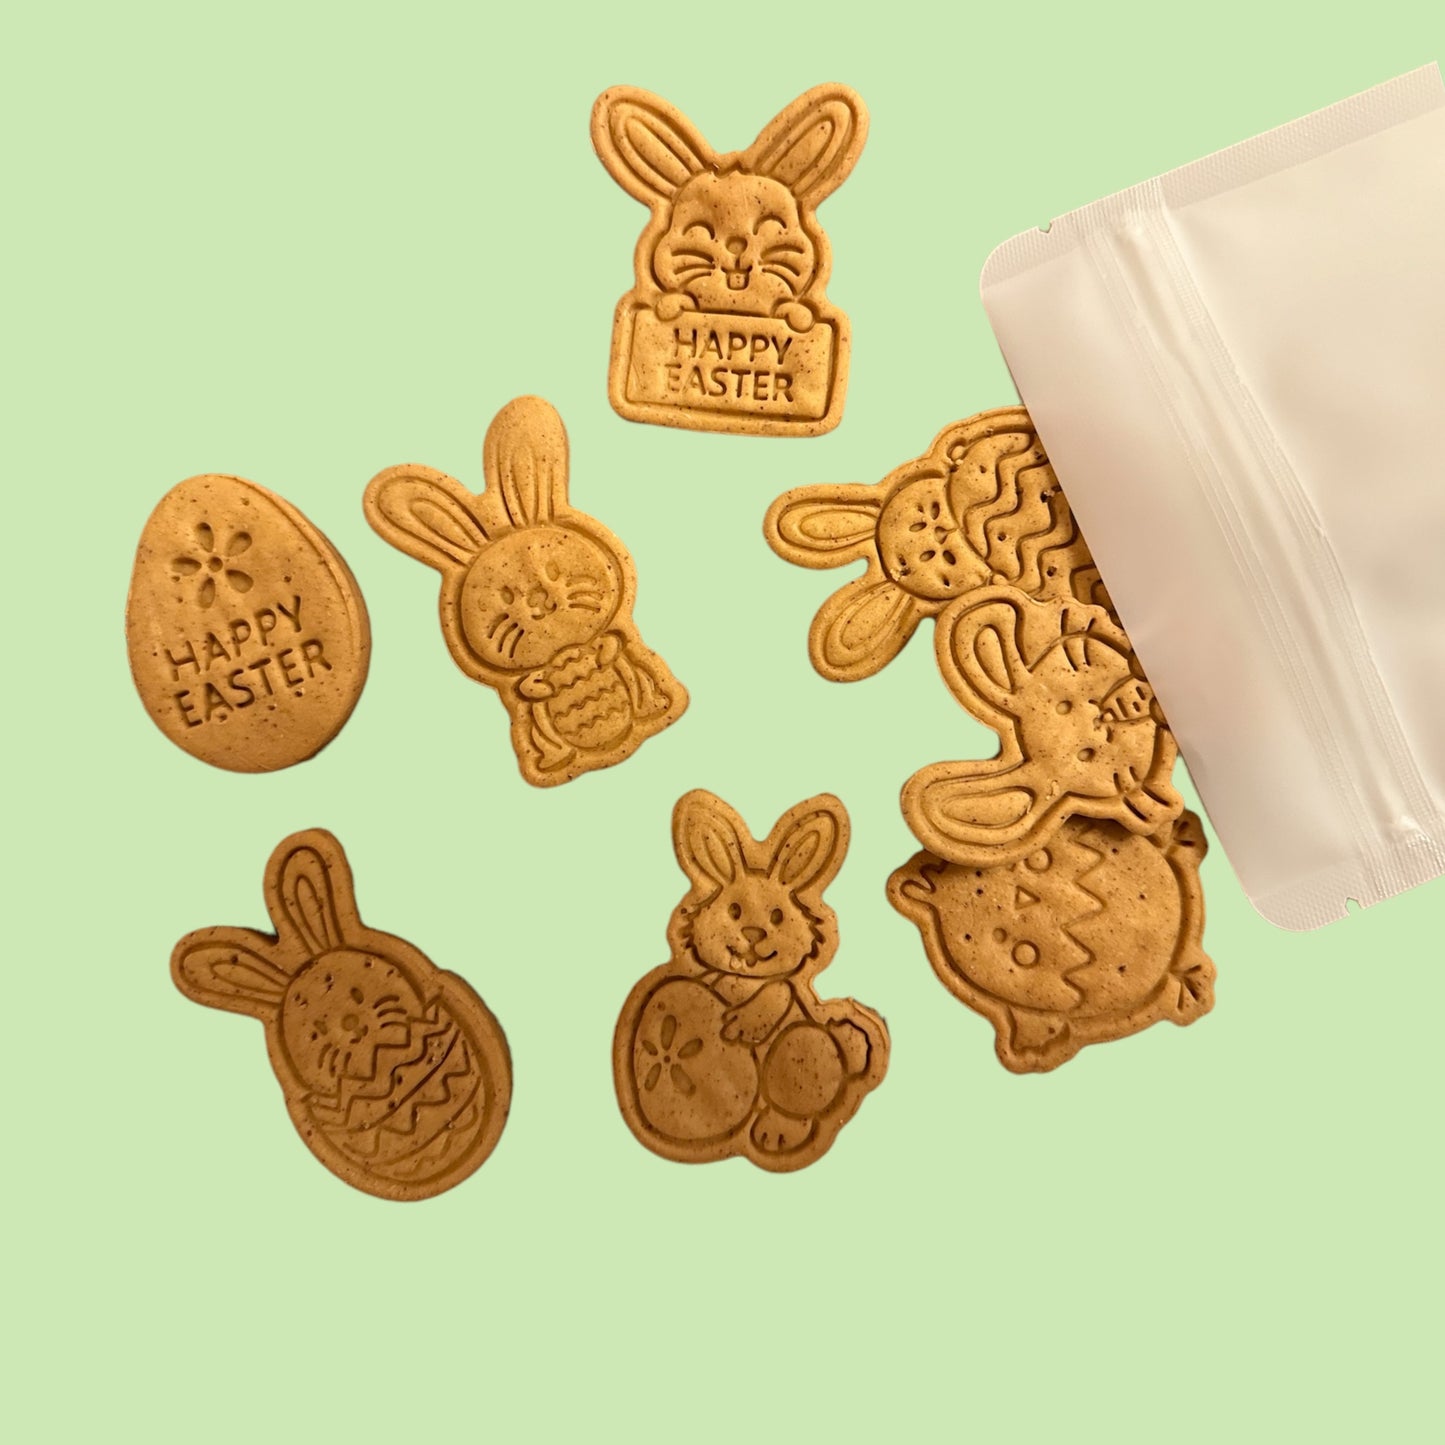 Happy Easter Mix Grain Free Dog Biscuits Wholesale